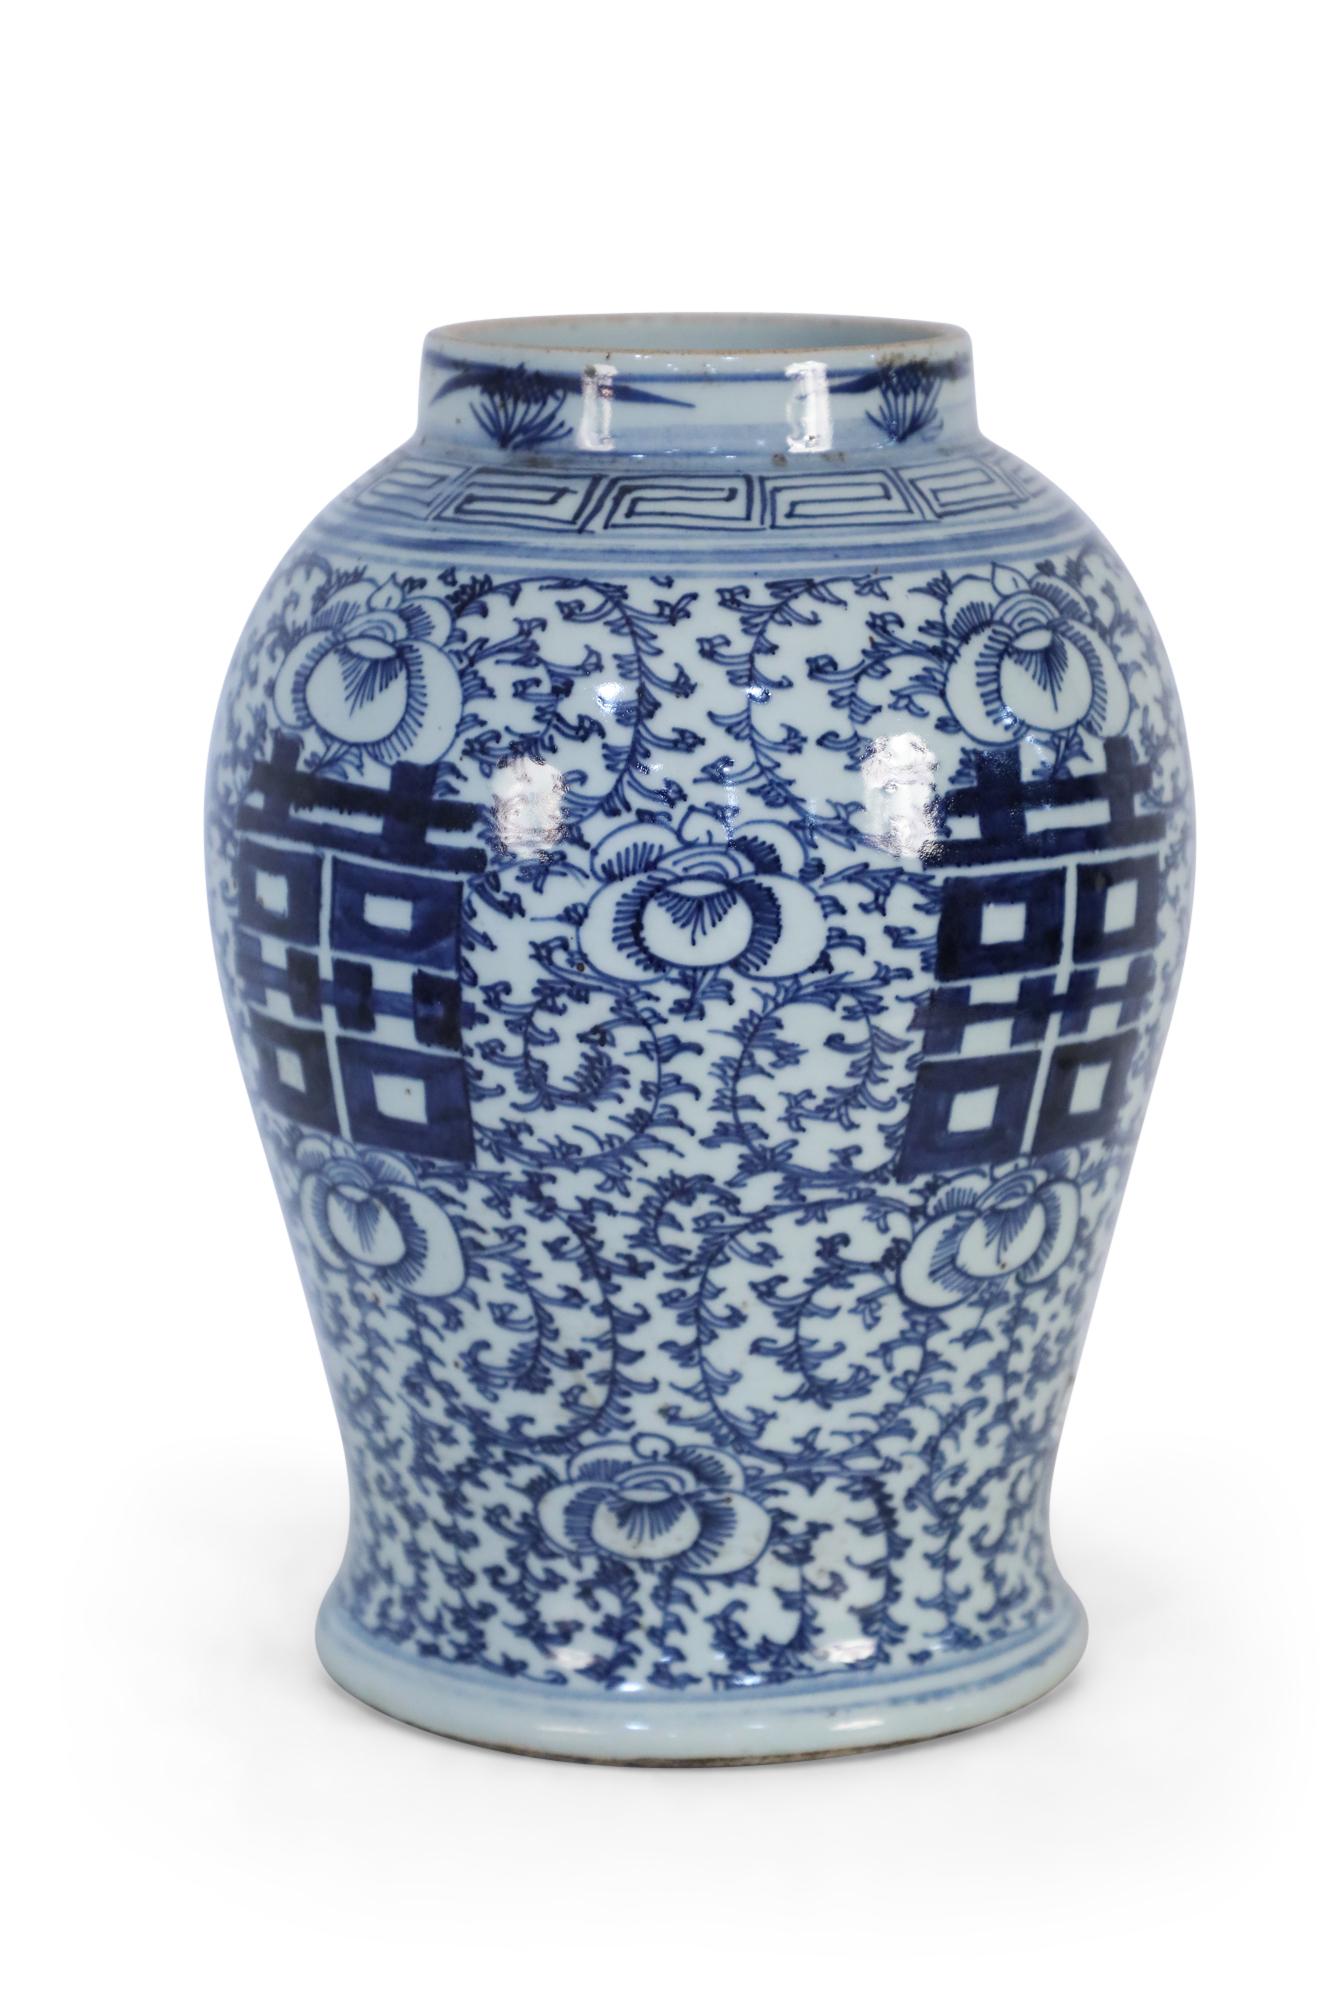 Antique Chinese (Late 19th Century) ceramic urn with blue floral designs surrounding bold, centered characters on 4 sides.
 